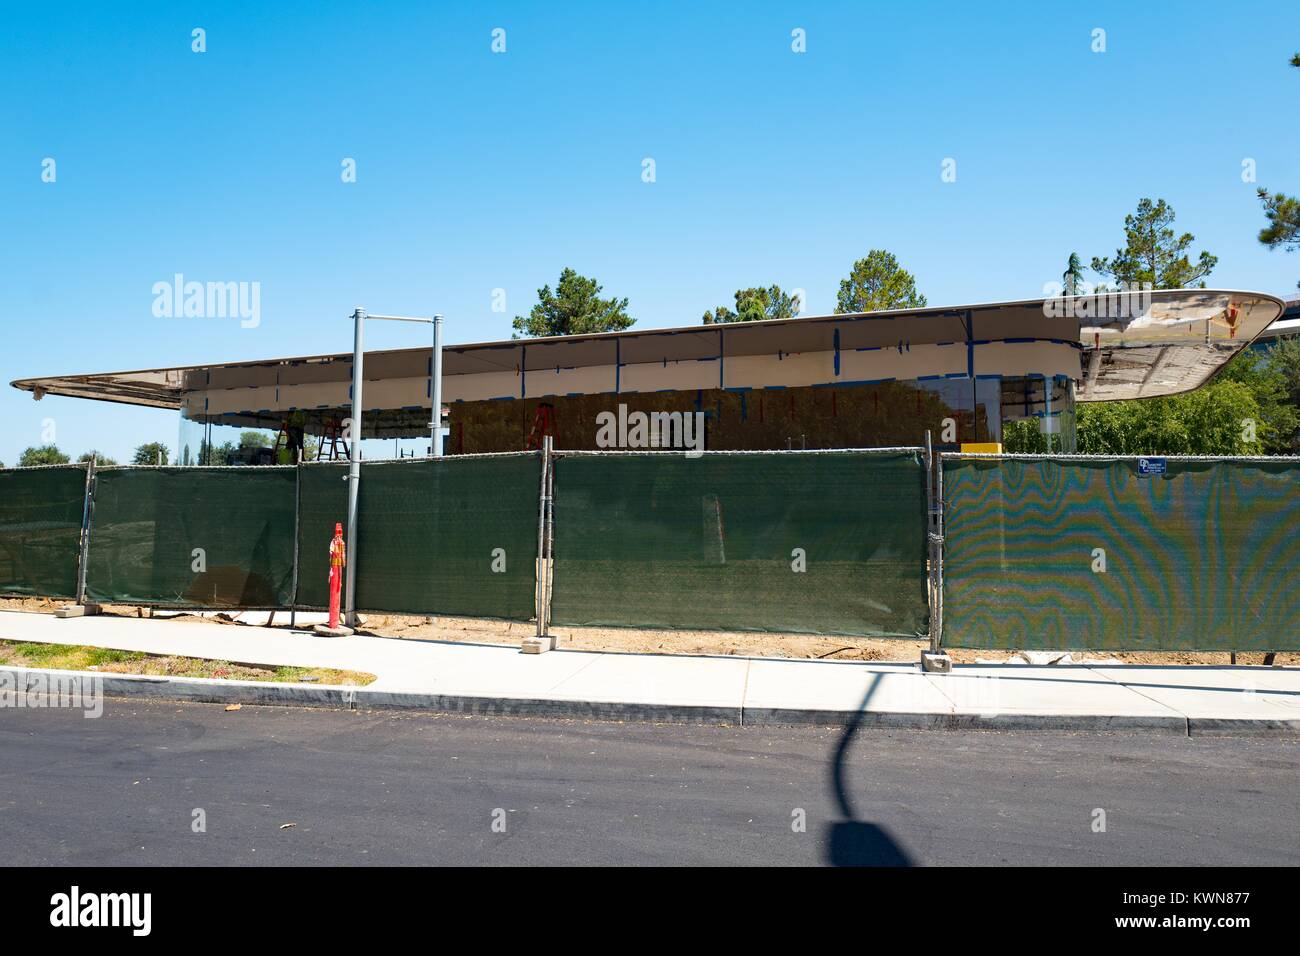 A partially constructed building is visible behind a construction fence on Pruneride Avenue at the Apple Park, known colloquially as 'The Spaceship', the new headquarters of Apple Inc in the Silicon Valley town of Cupertino, California, July 25, 2017. Stock Photo